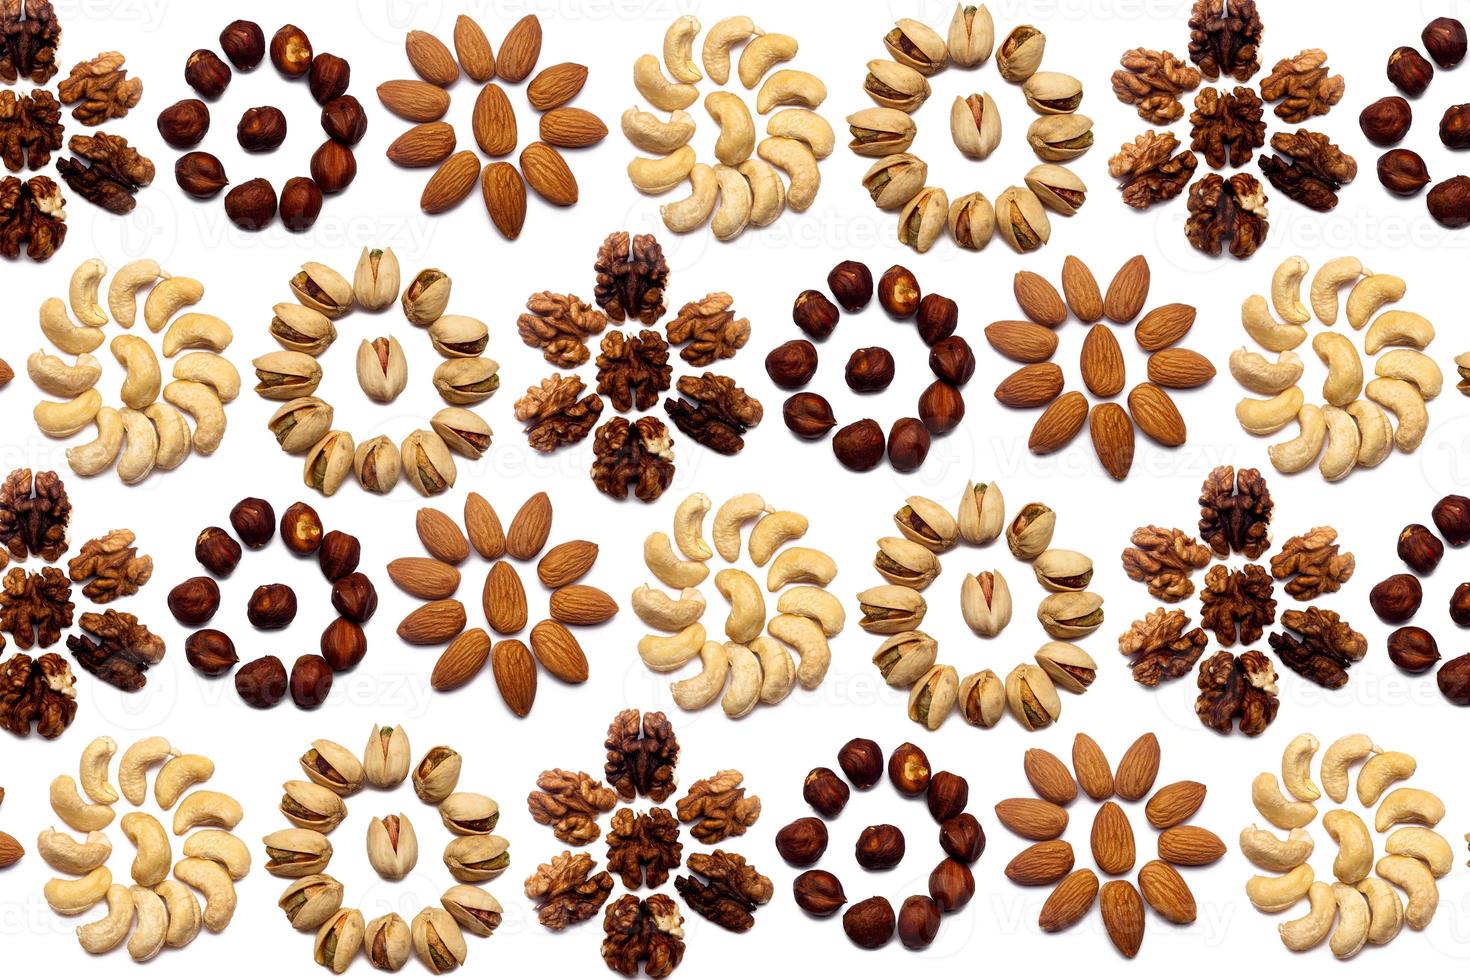 A collection of nuts made from almonds, walnuts, hazelnuts, pistachios, cashews lie in the shape of a circle or the sun on an isolated white background with a clipping path. Various nuts pattern photo